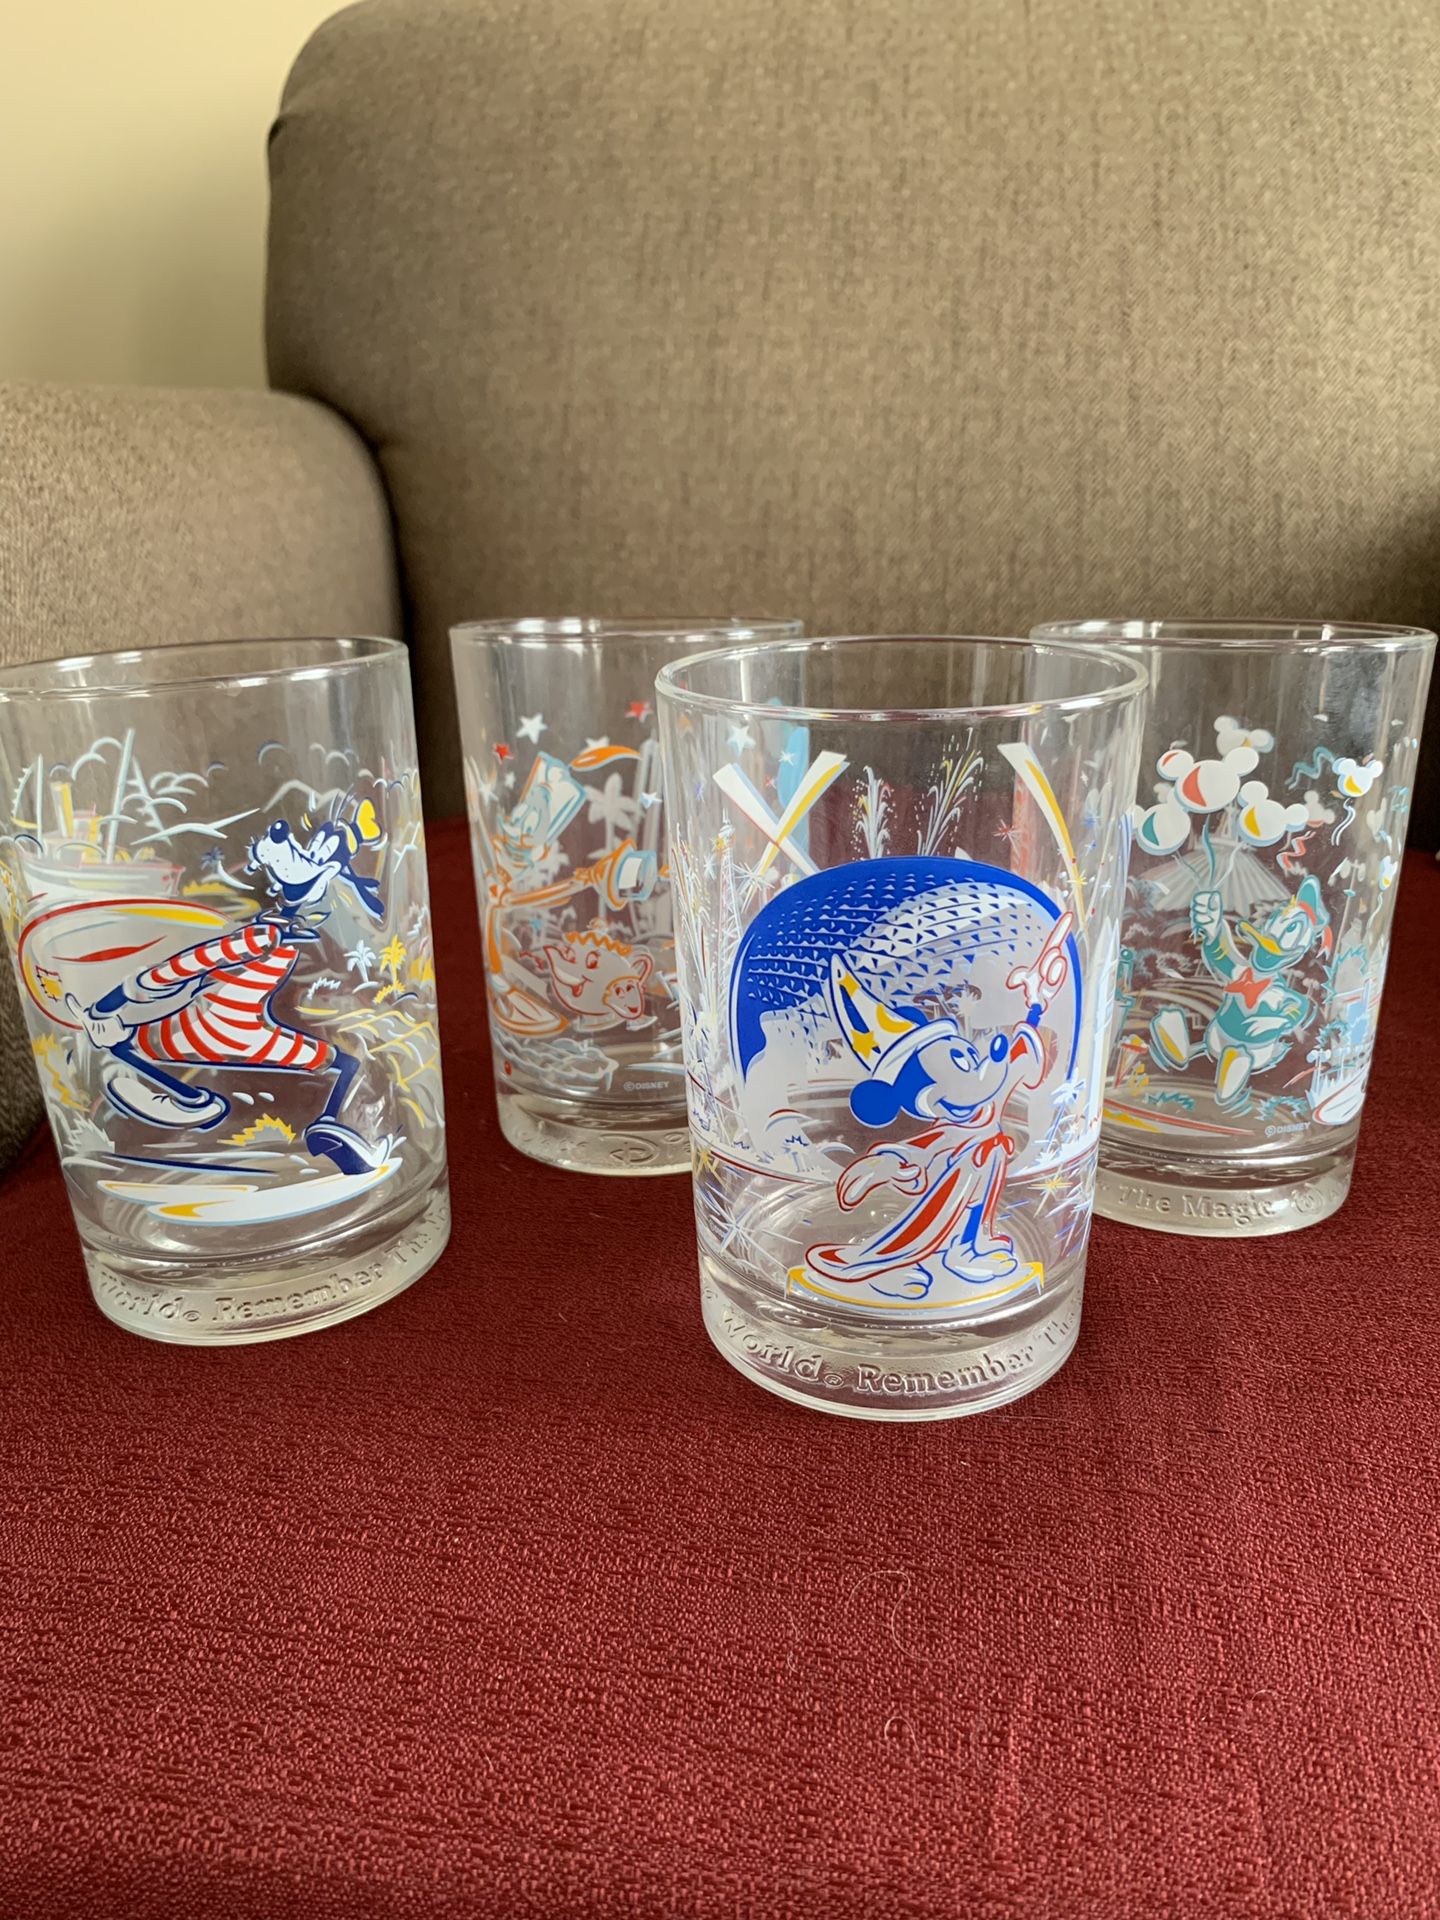 Disney “Remember the Magic” collectible glasses.